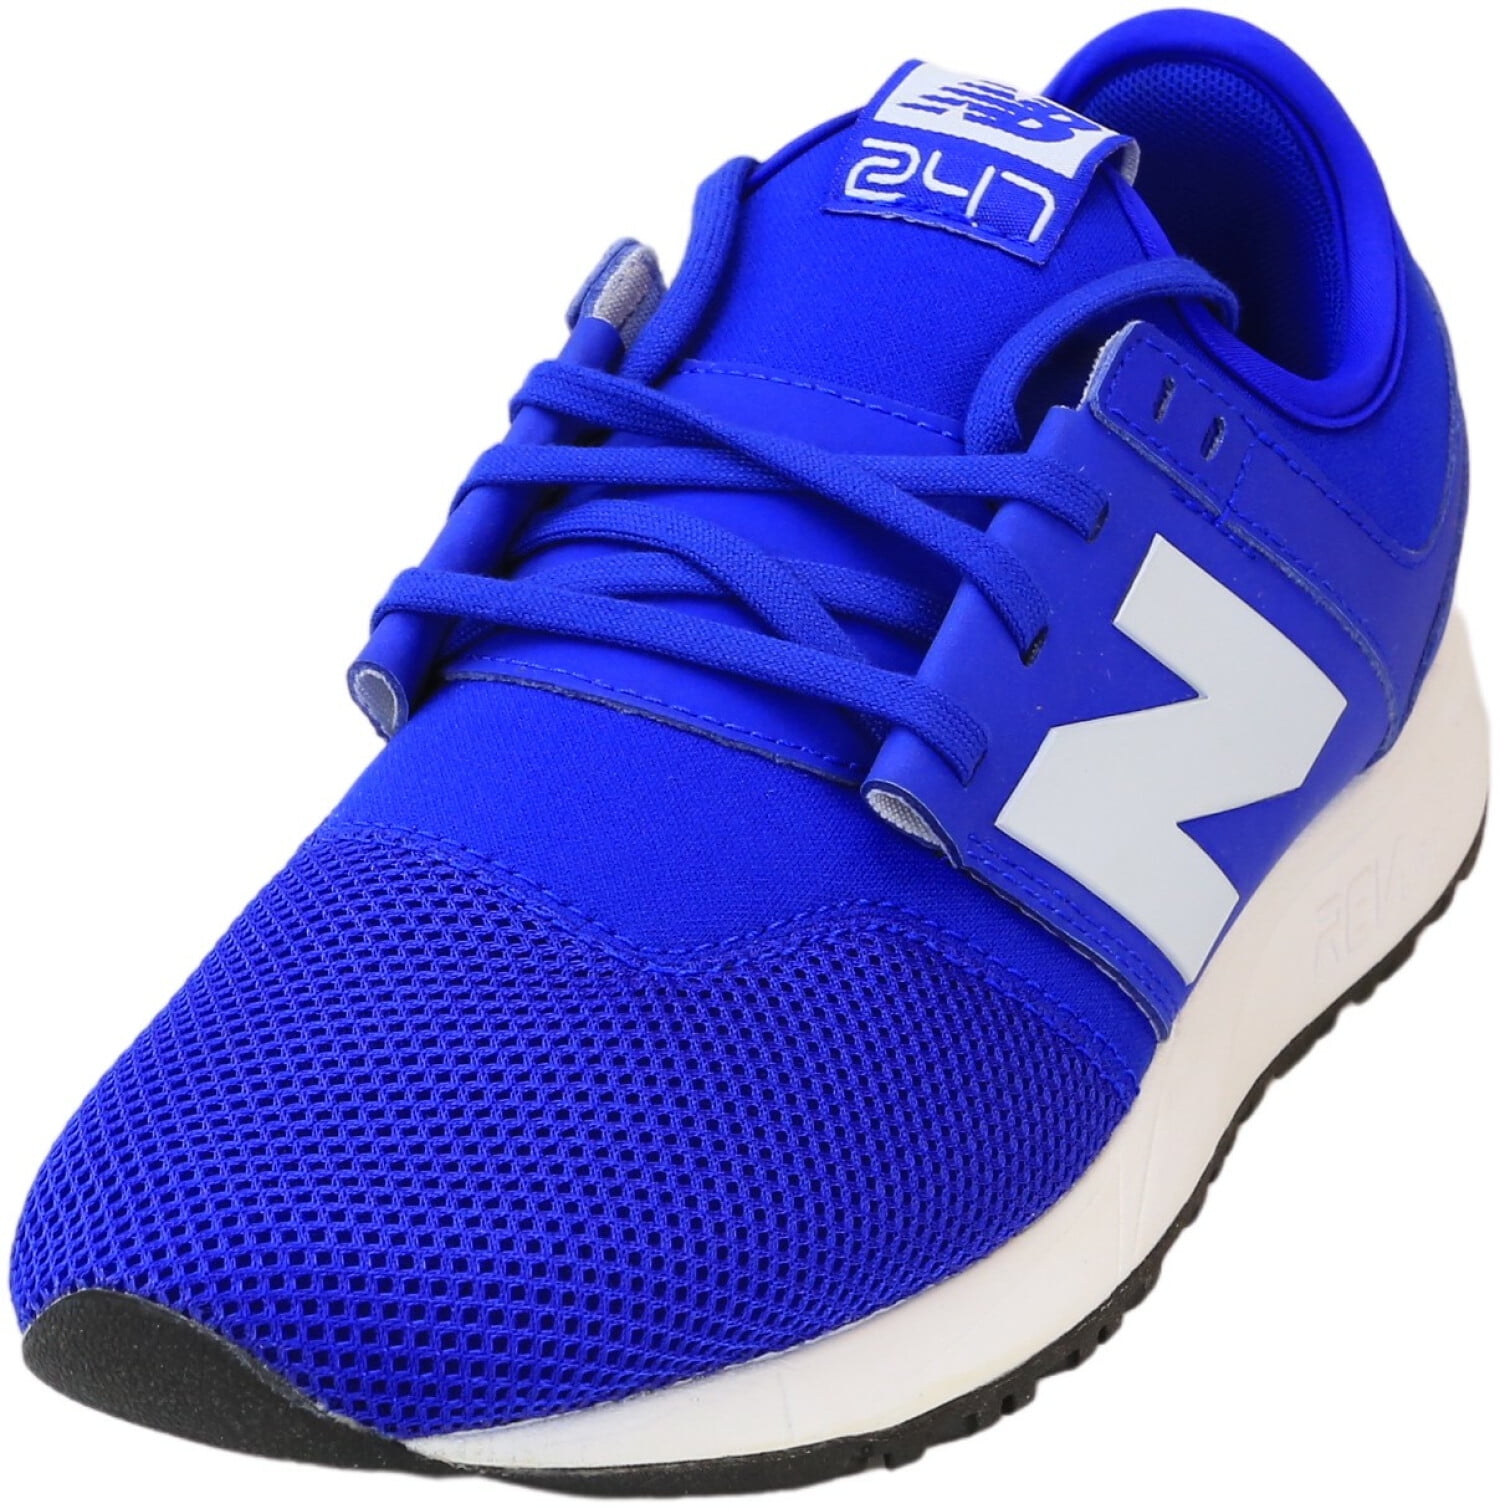 does walmart sell new balance shoes